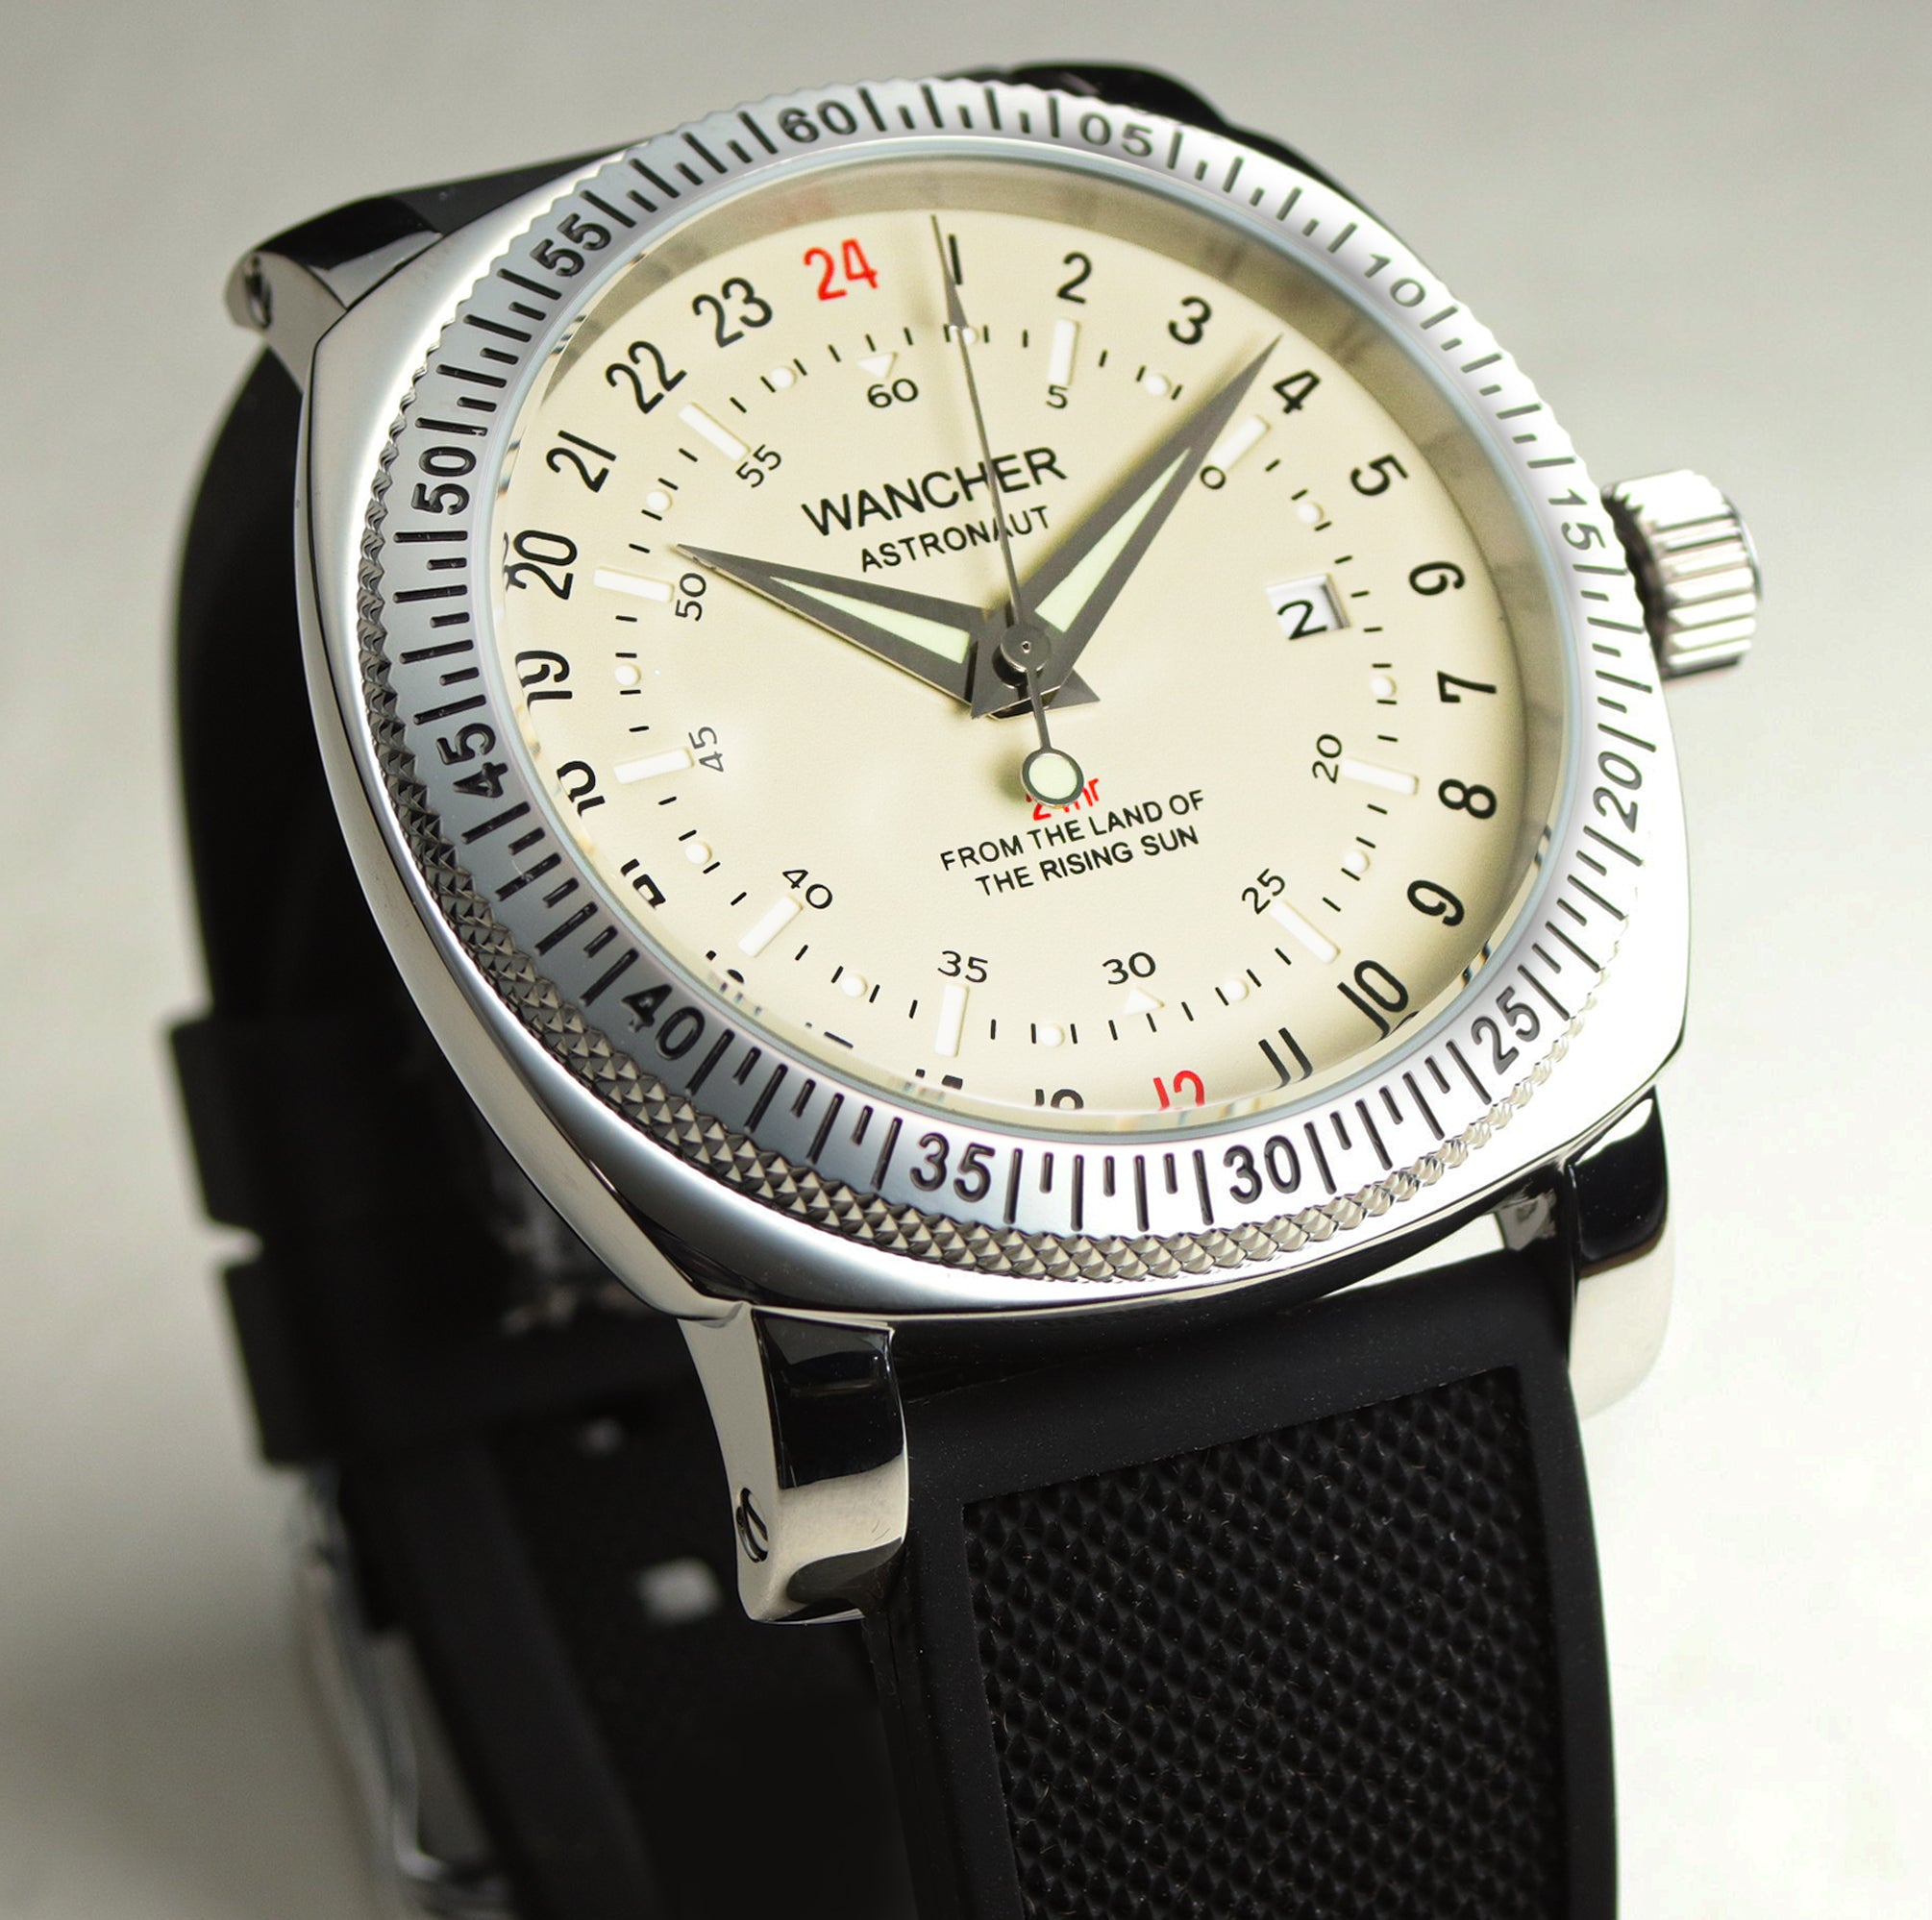 Introducing - The Sattelberg Automatic from Second Hour Watches